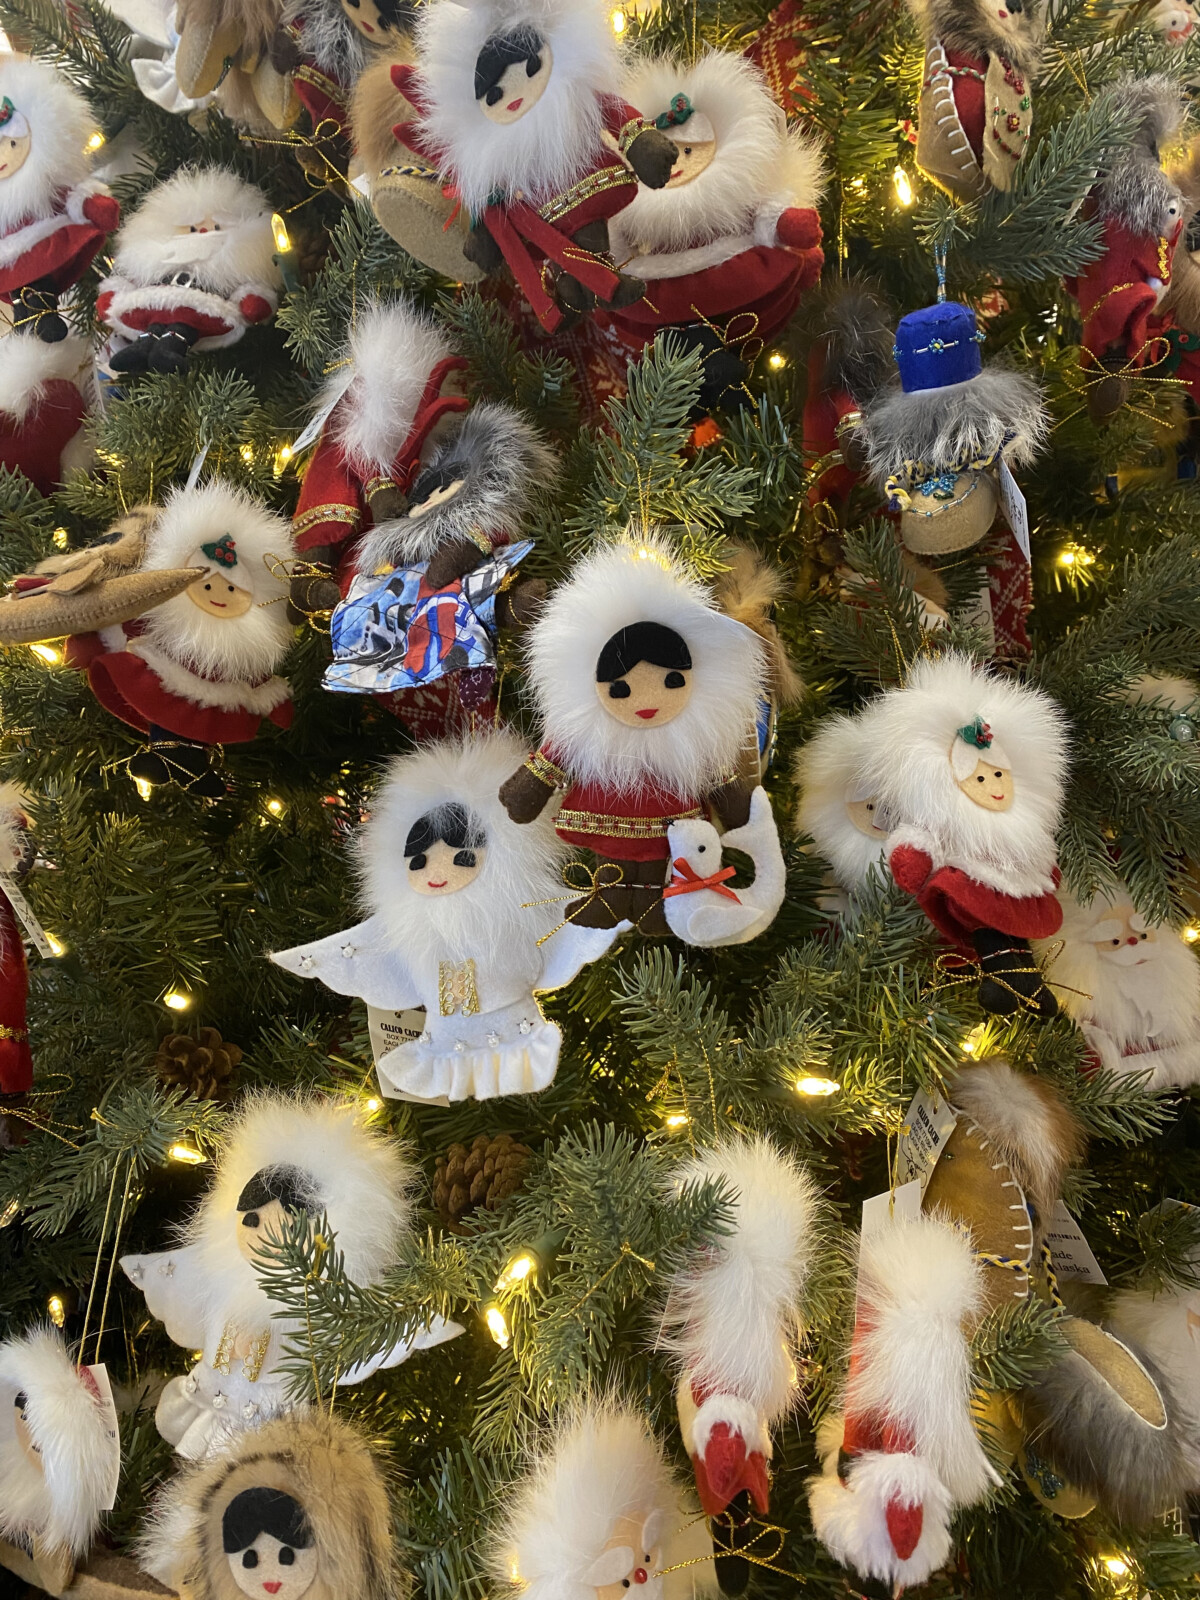 Handmade ornaments for sale at Santa Claus House.